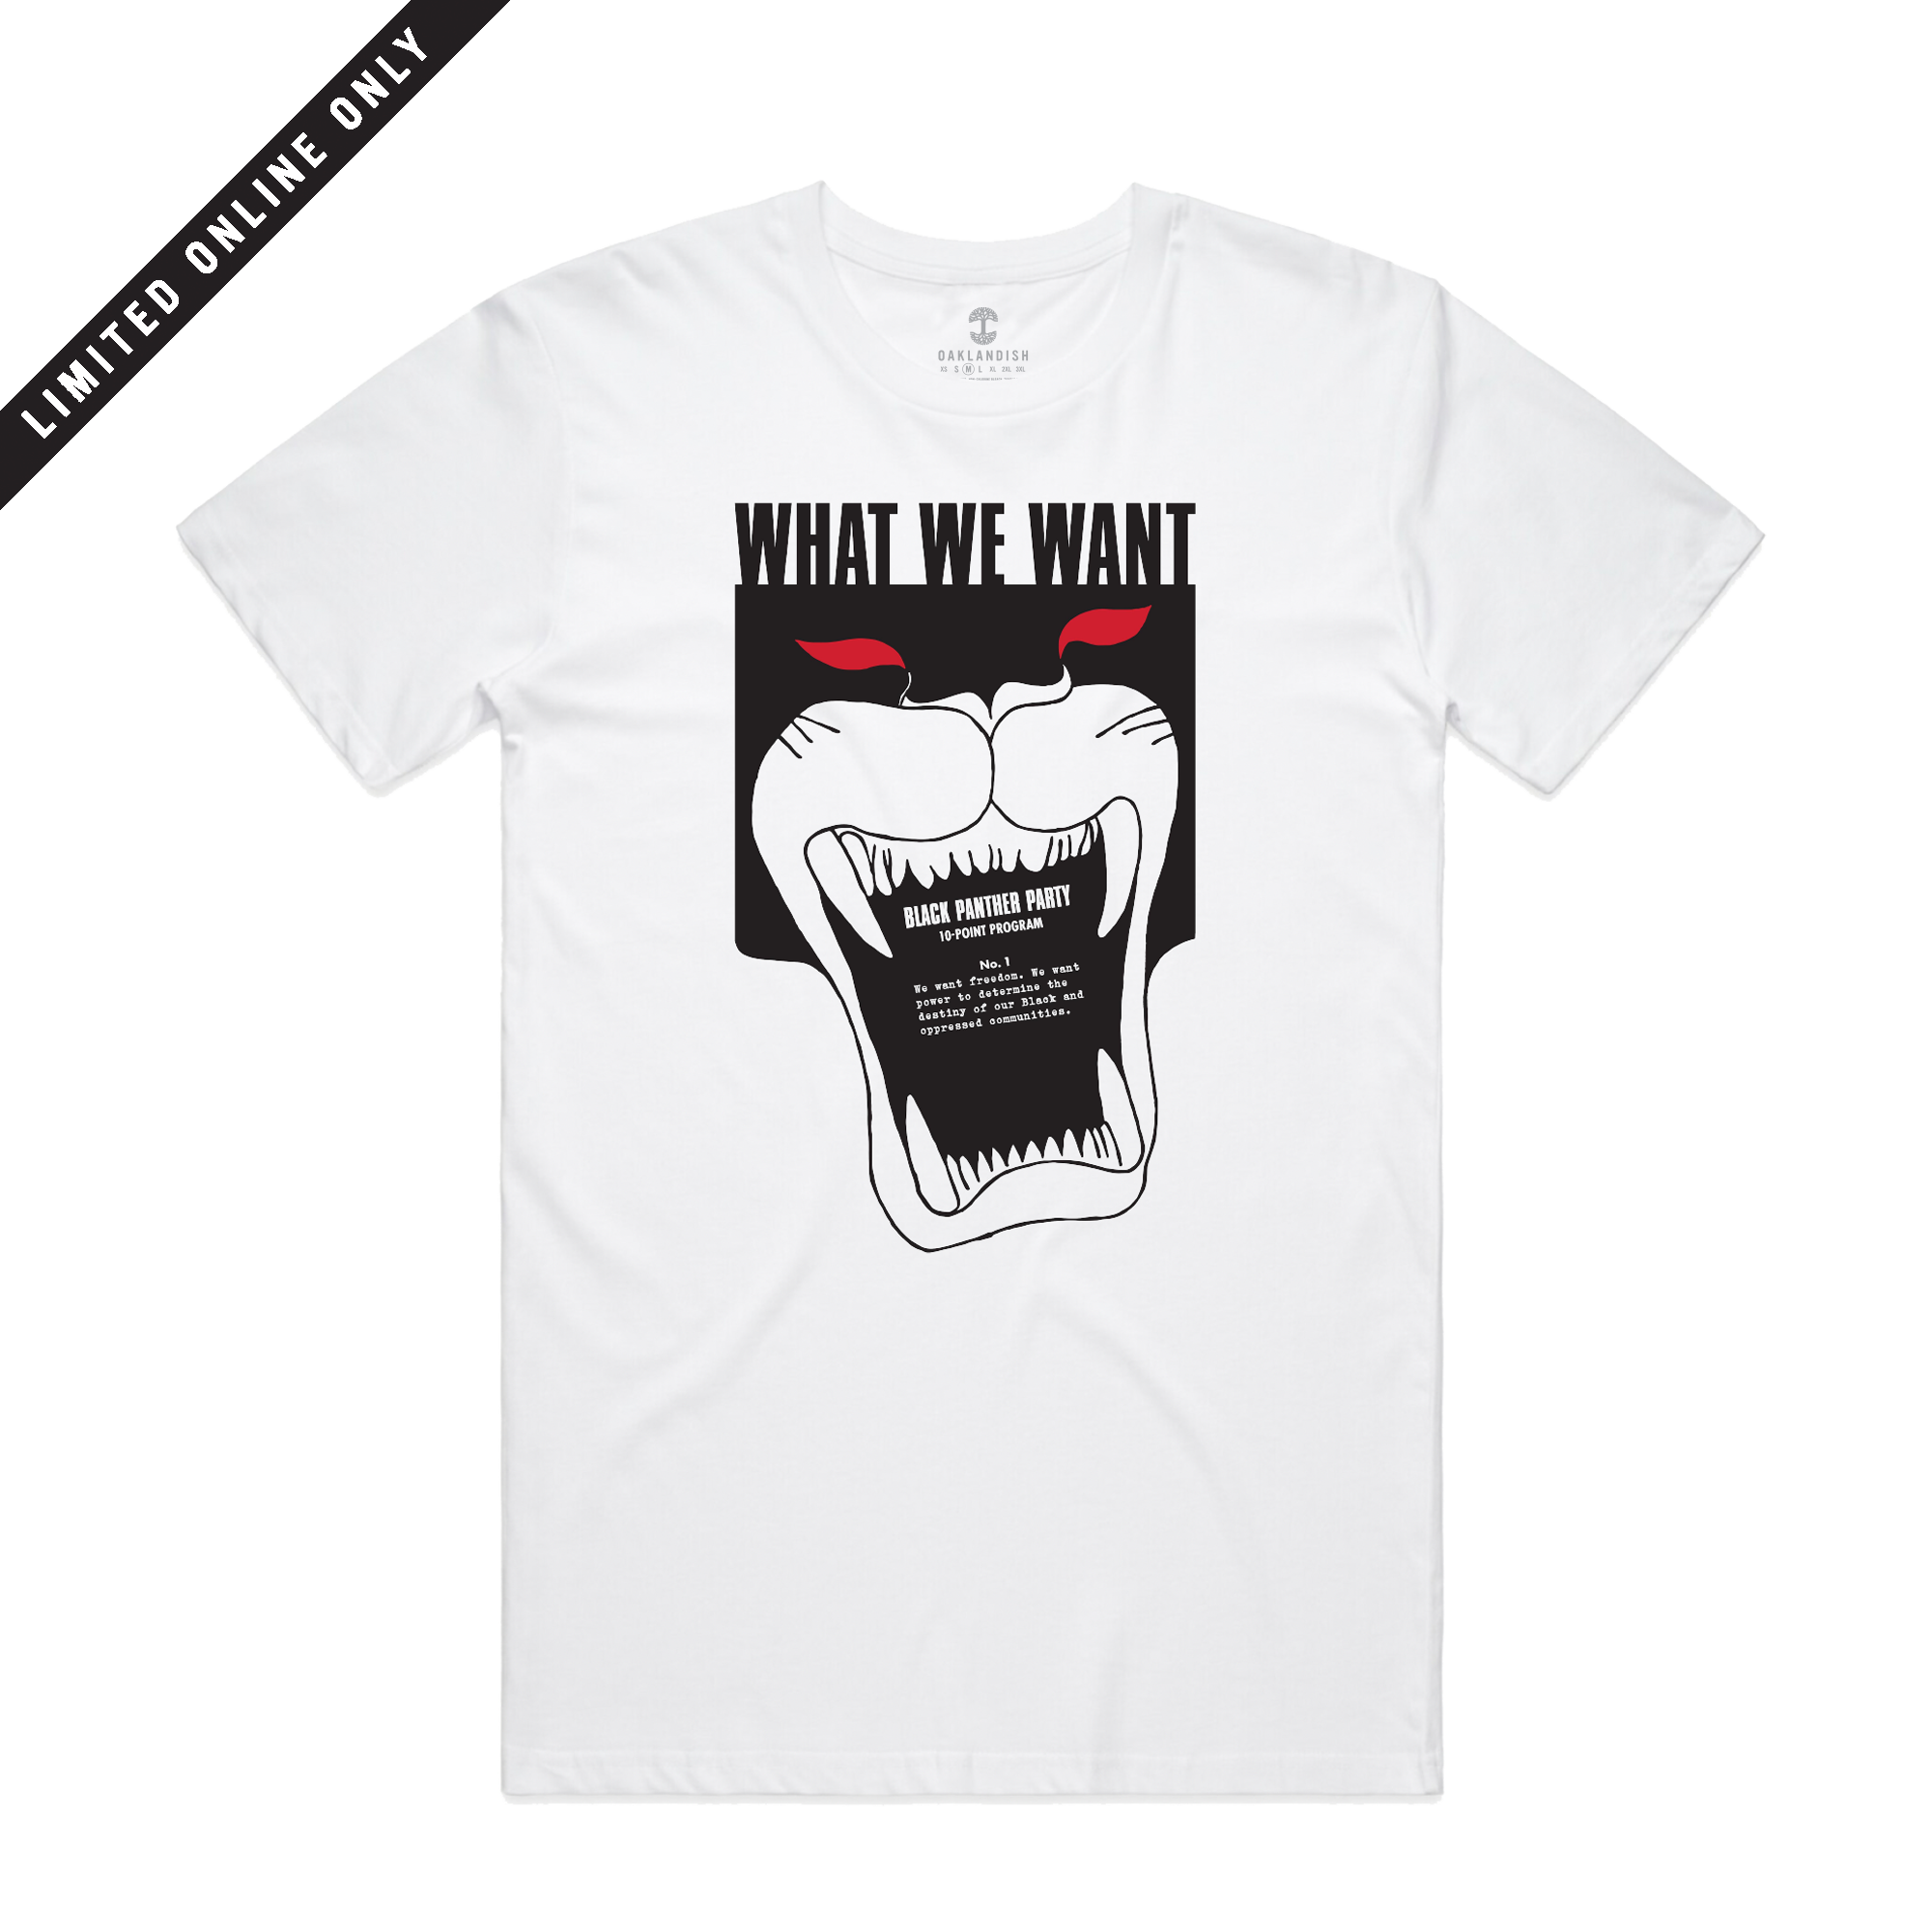 Front view of white cotton tee with image of a What Want : 10 Point Platform # 1 